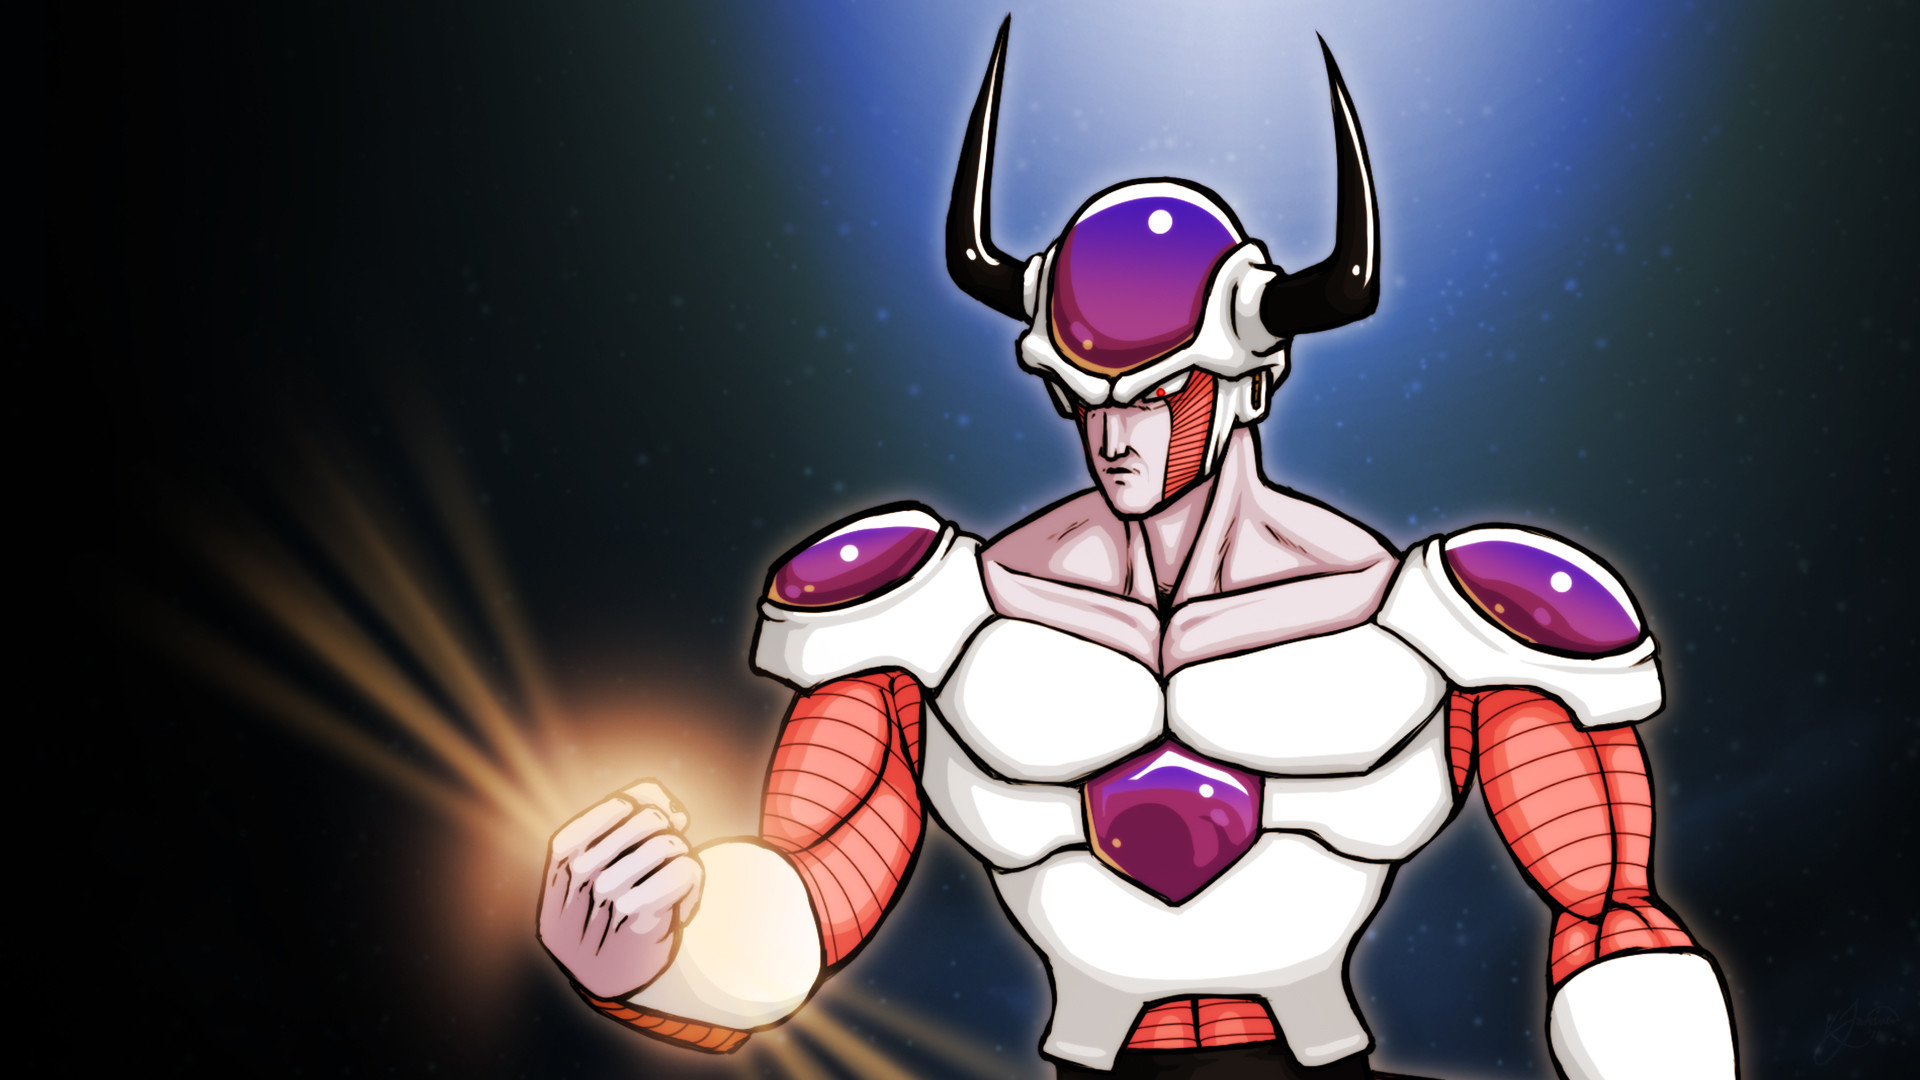 800×600 px Frieza Wallpapers